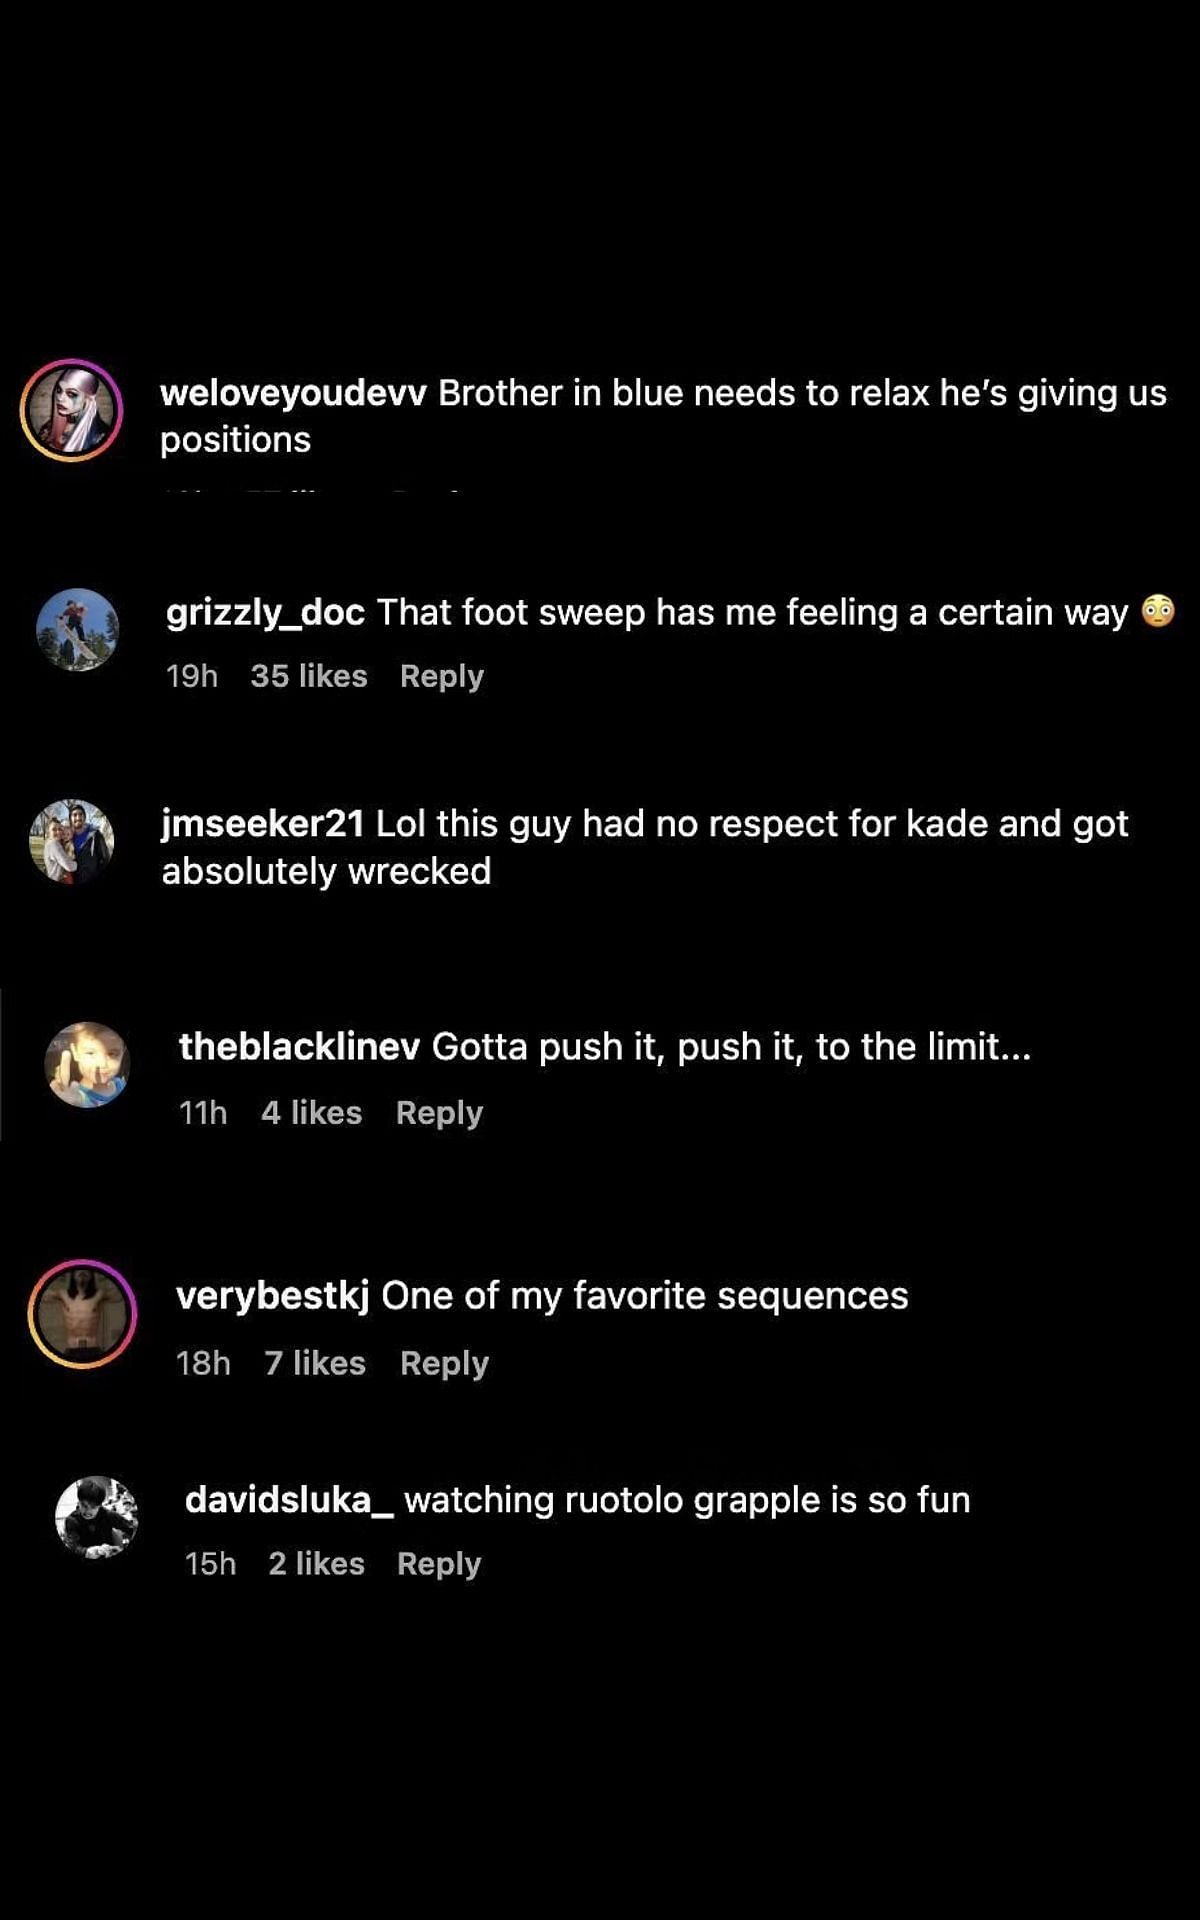 Comments on the video